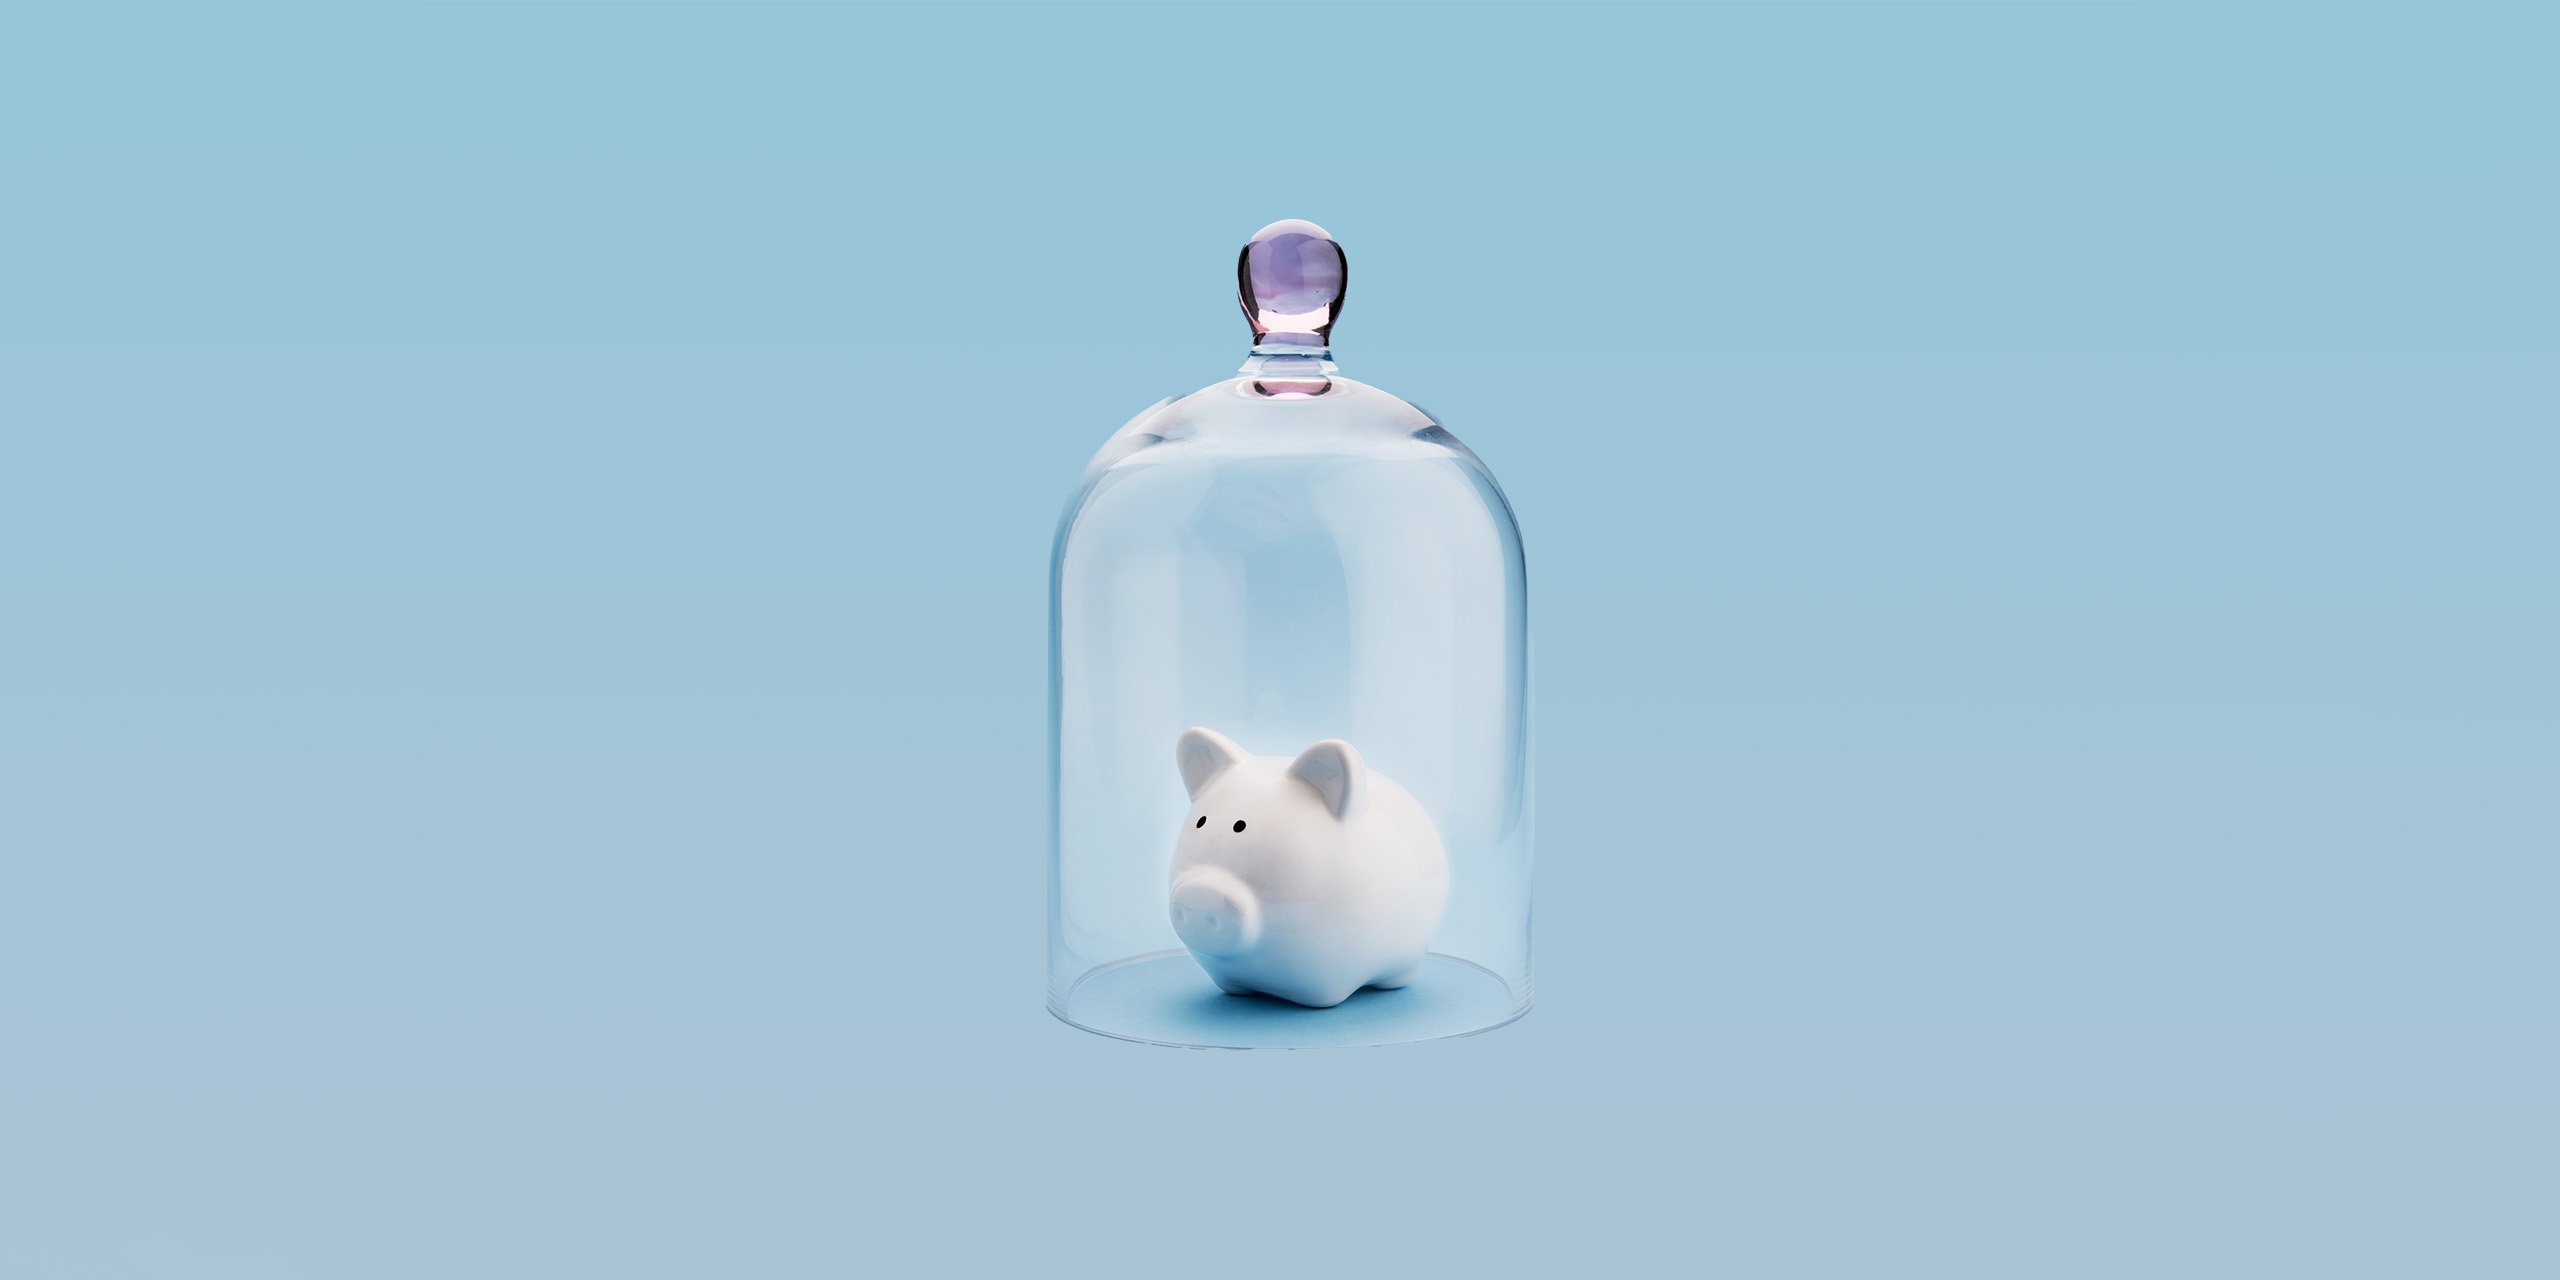 Piggybank protected under a glass dome